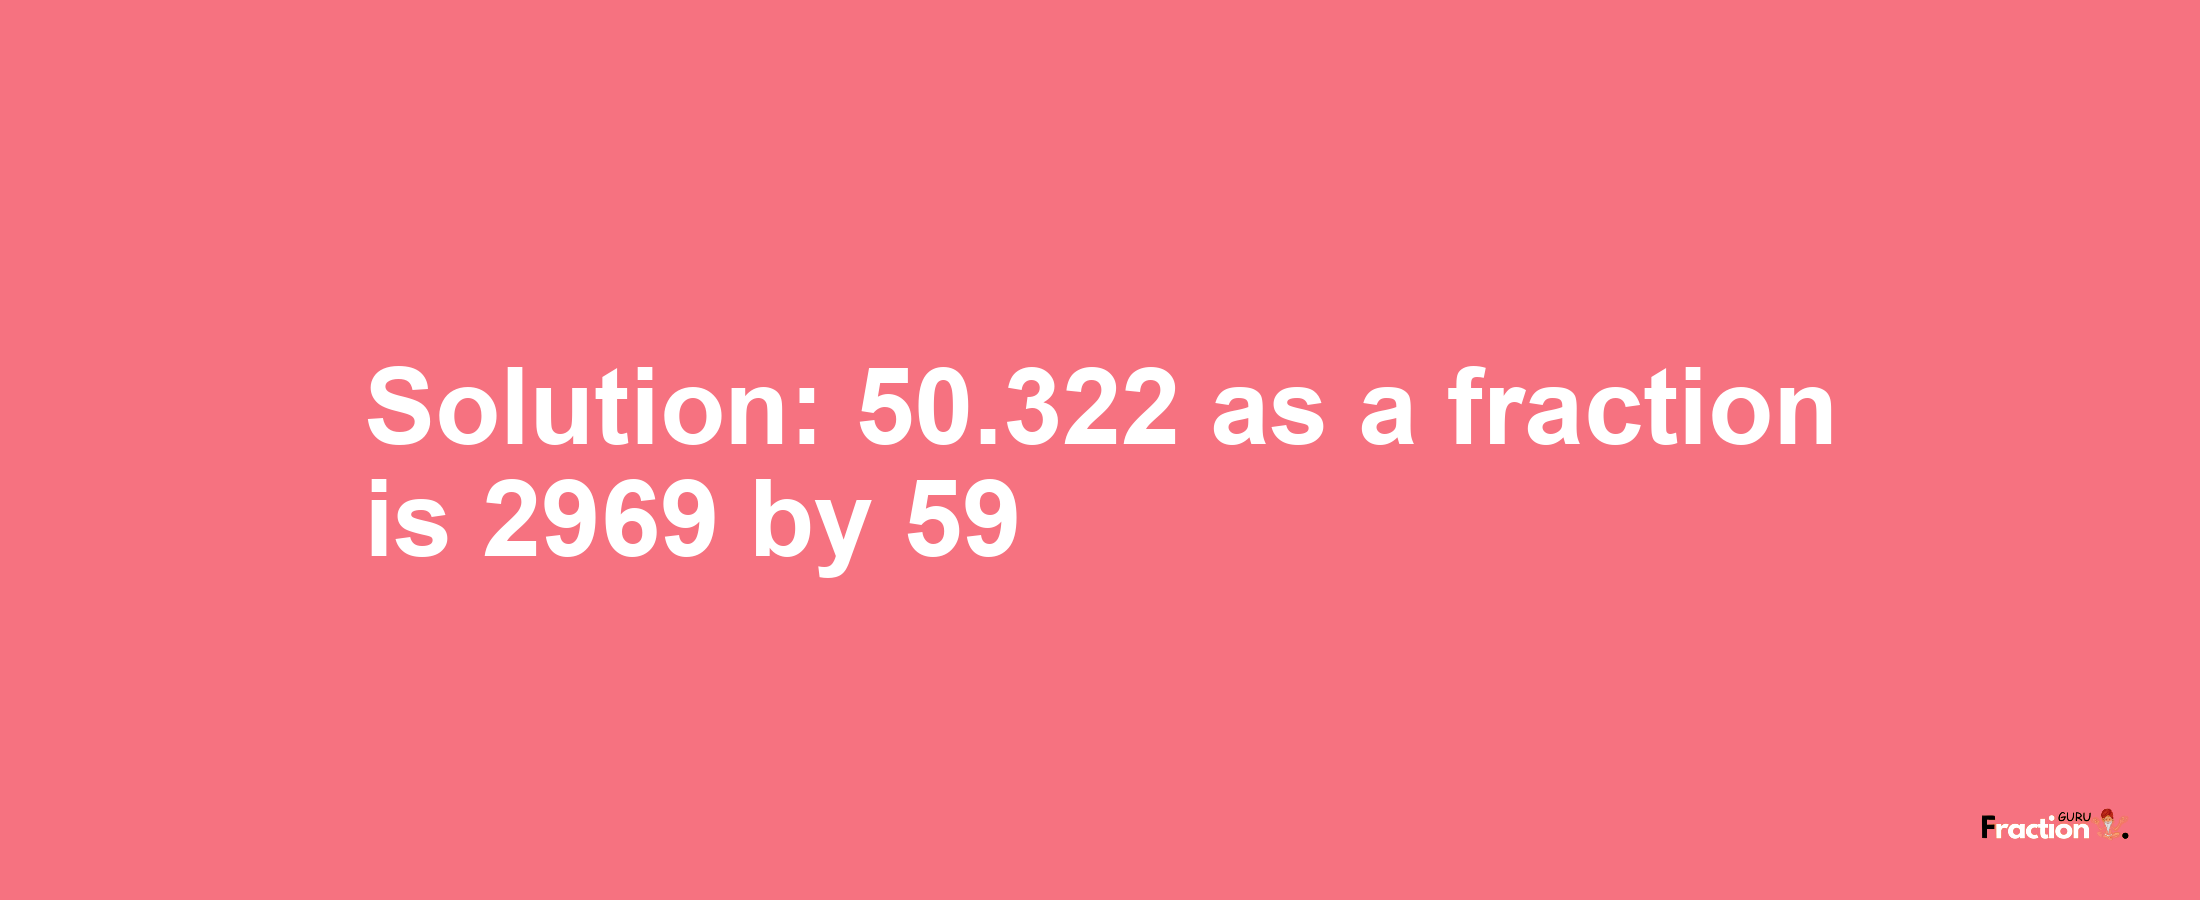 Solution:50.322 as a fraction is 2969/59